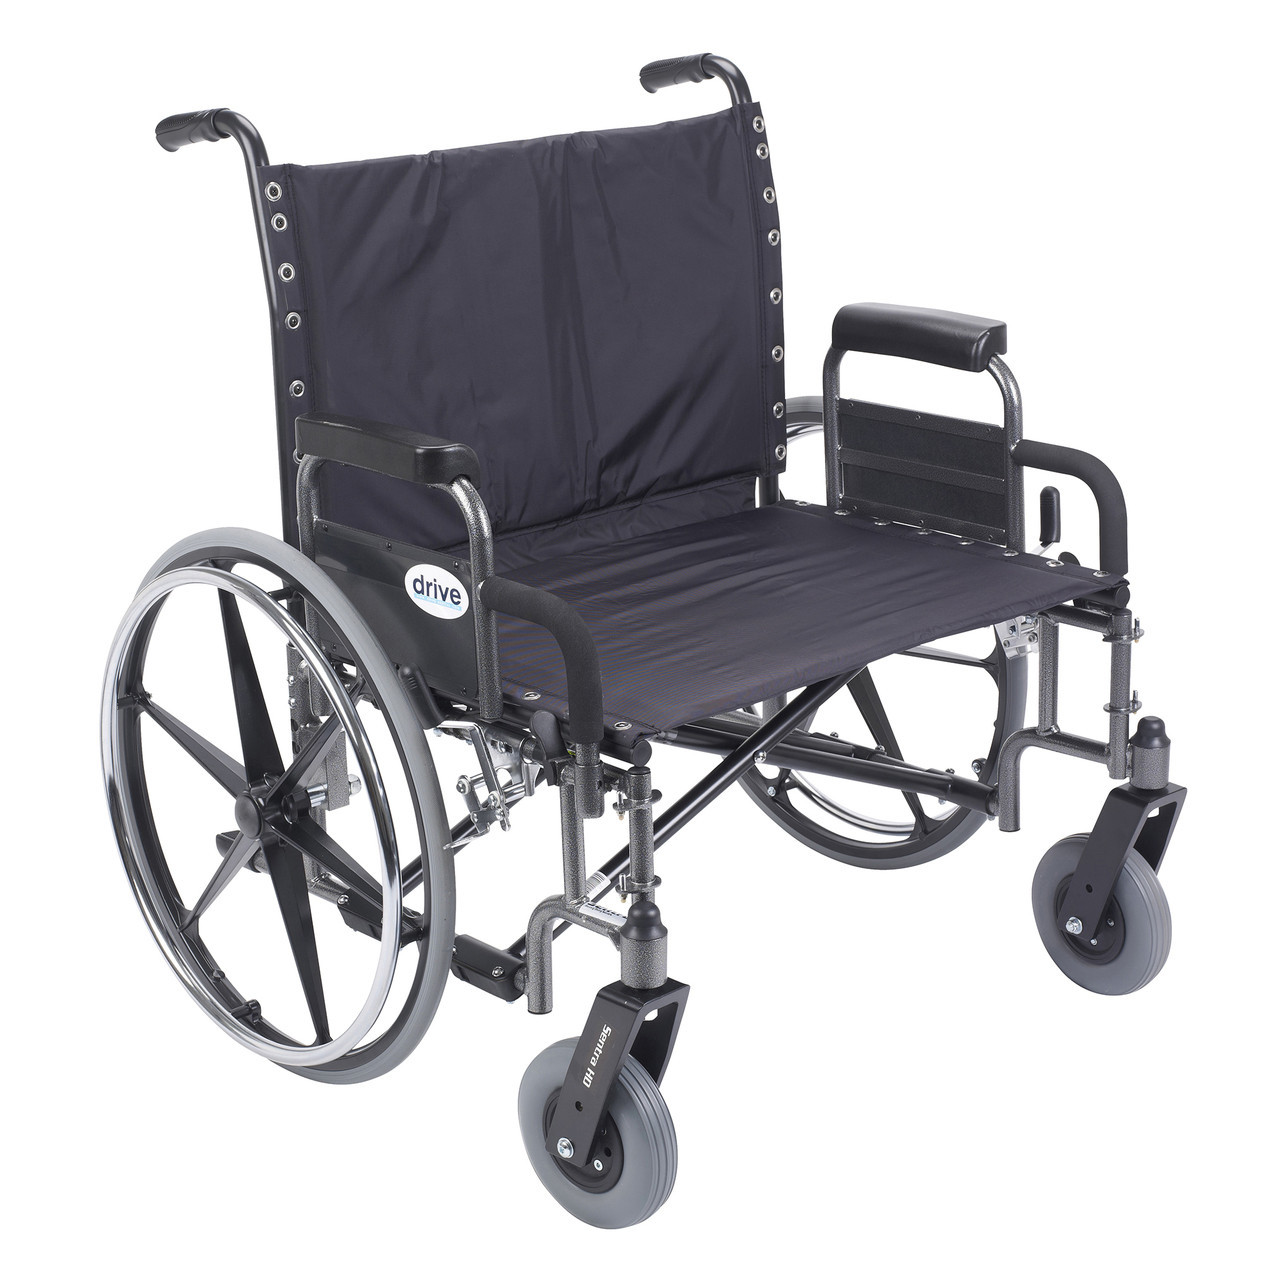 Sentra Extra Wide Heavy Duty Wheelchair By Drive - Choice Mobility